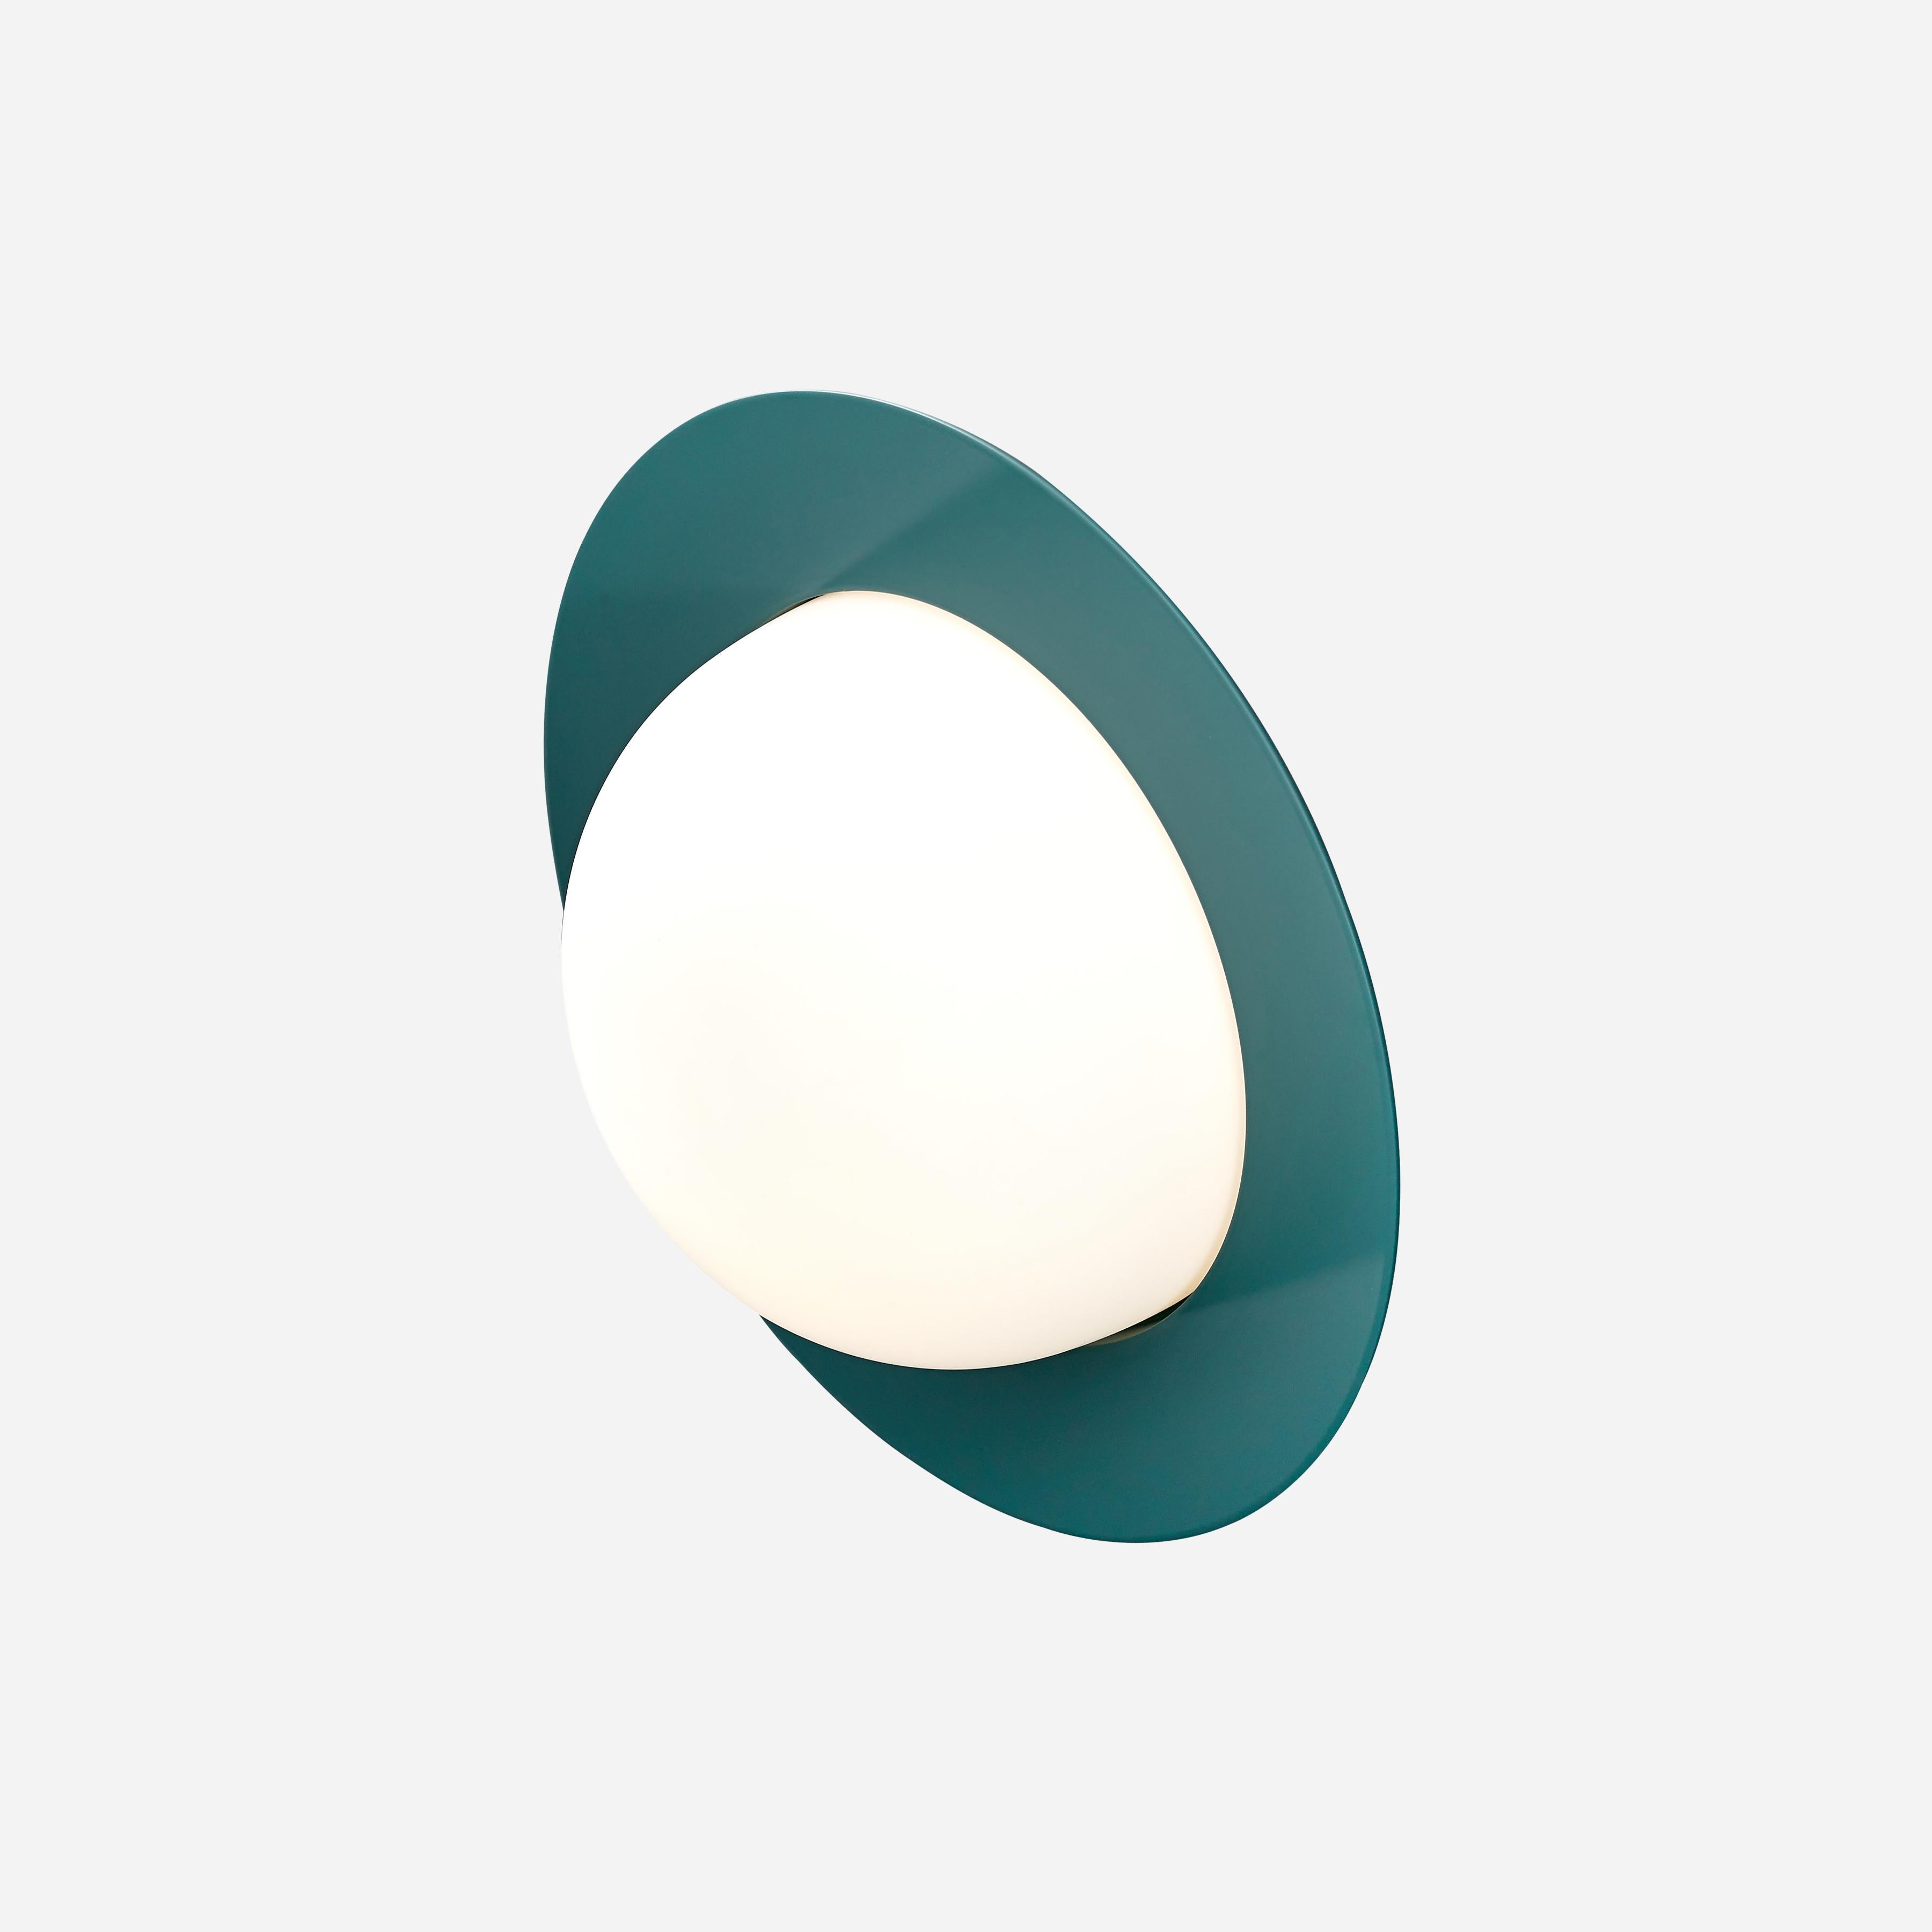 Alley wall lamp by AGO Lighting
UL Listed

Painted aluminum, white opal glass
LED G9 110-240V (not included)

Available colors:
Charcoal, white, grey, burgundy, and green

Dimensions:
32 x 17.3 cm (Large)
22.6 x 12.6 cm (Small)


AGO is a Korean